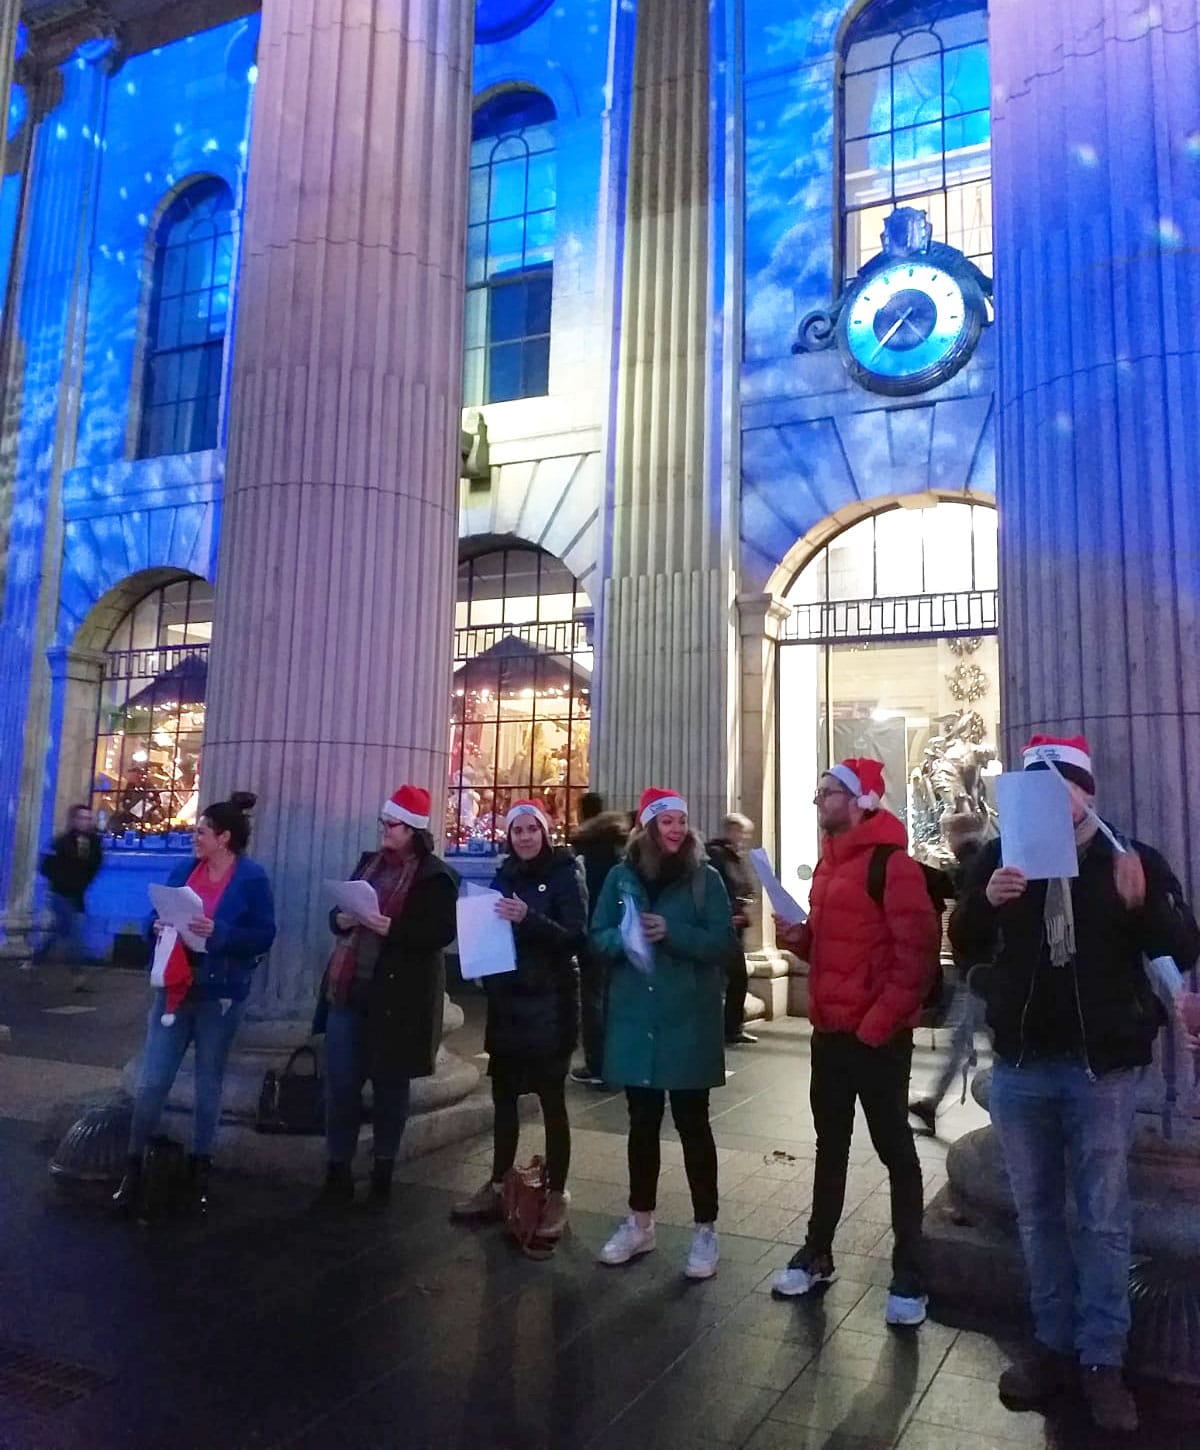 Some of the Md7 team singing outside of the historical General Post Office (G.P.O.) on O’Connell Street in Dublin.